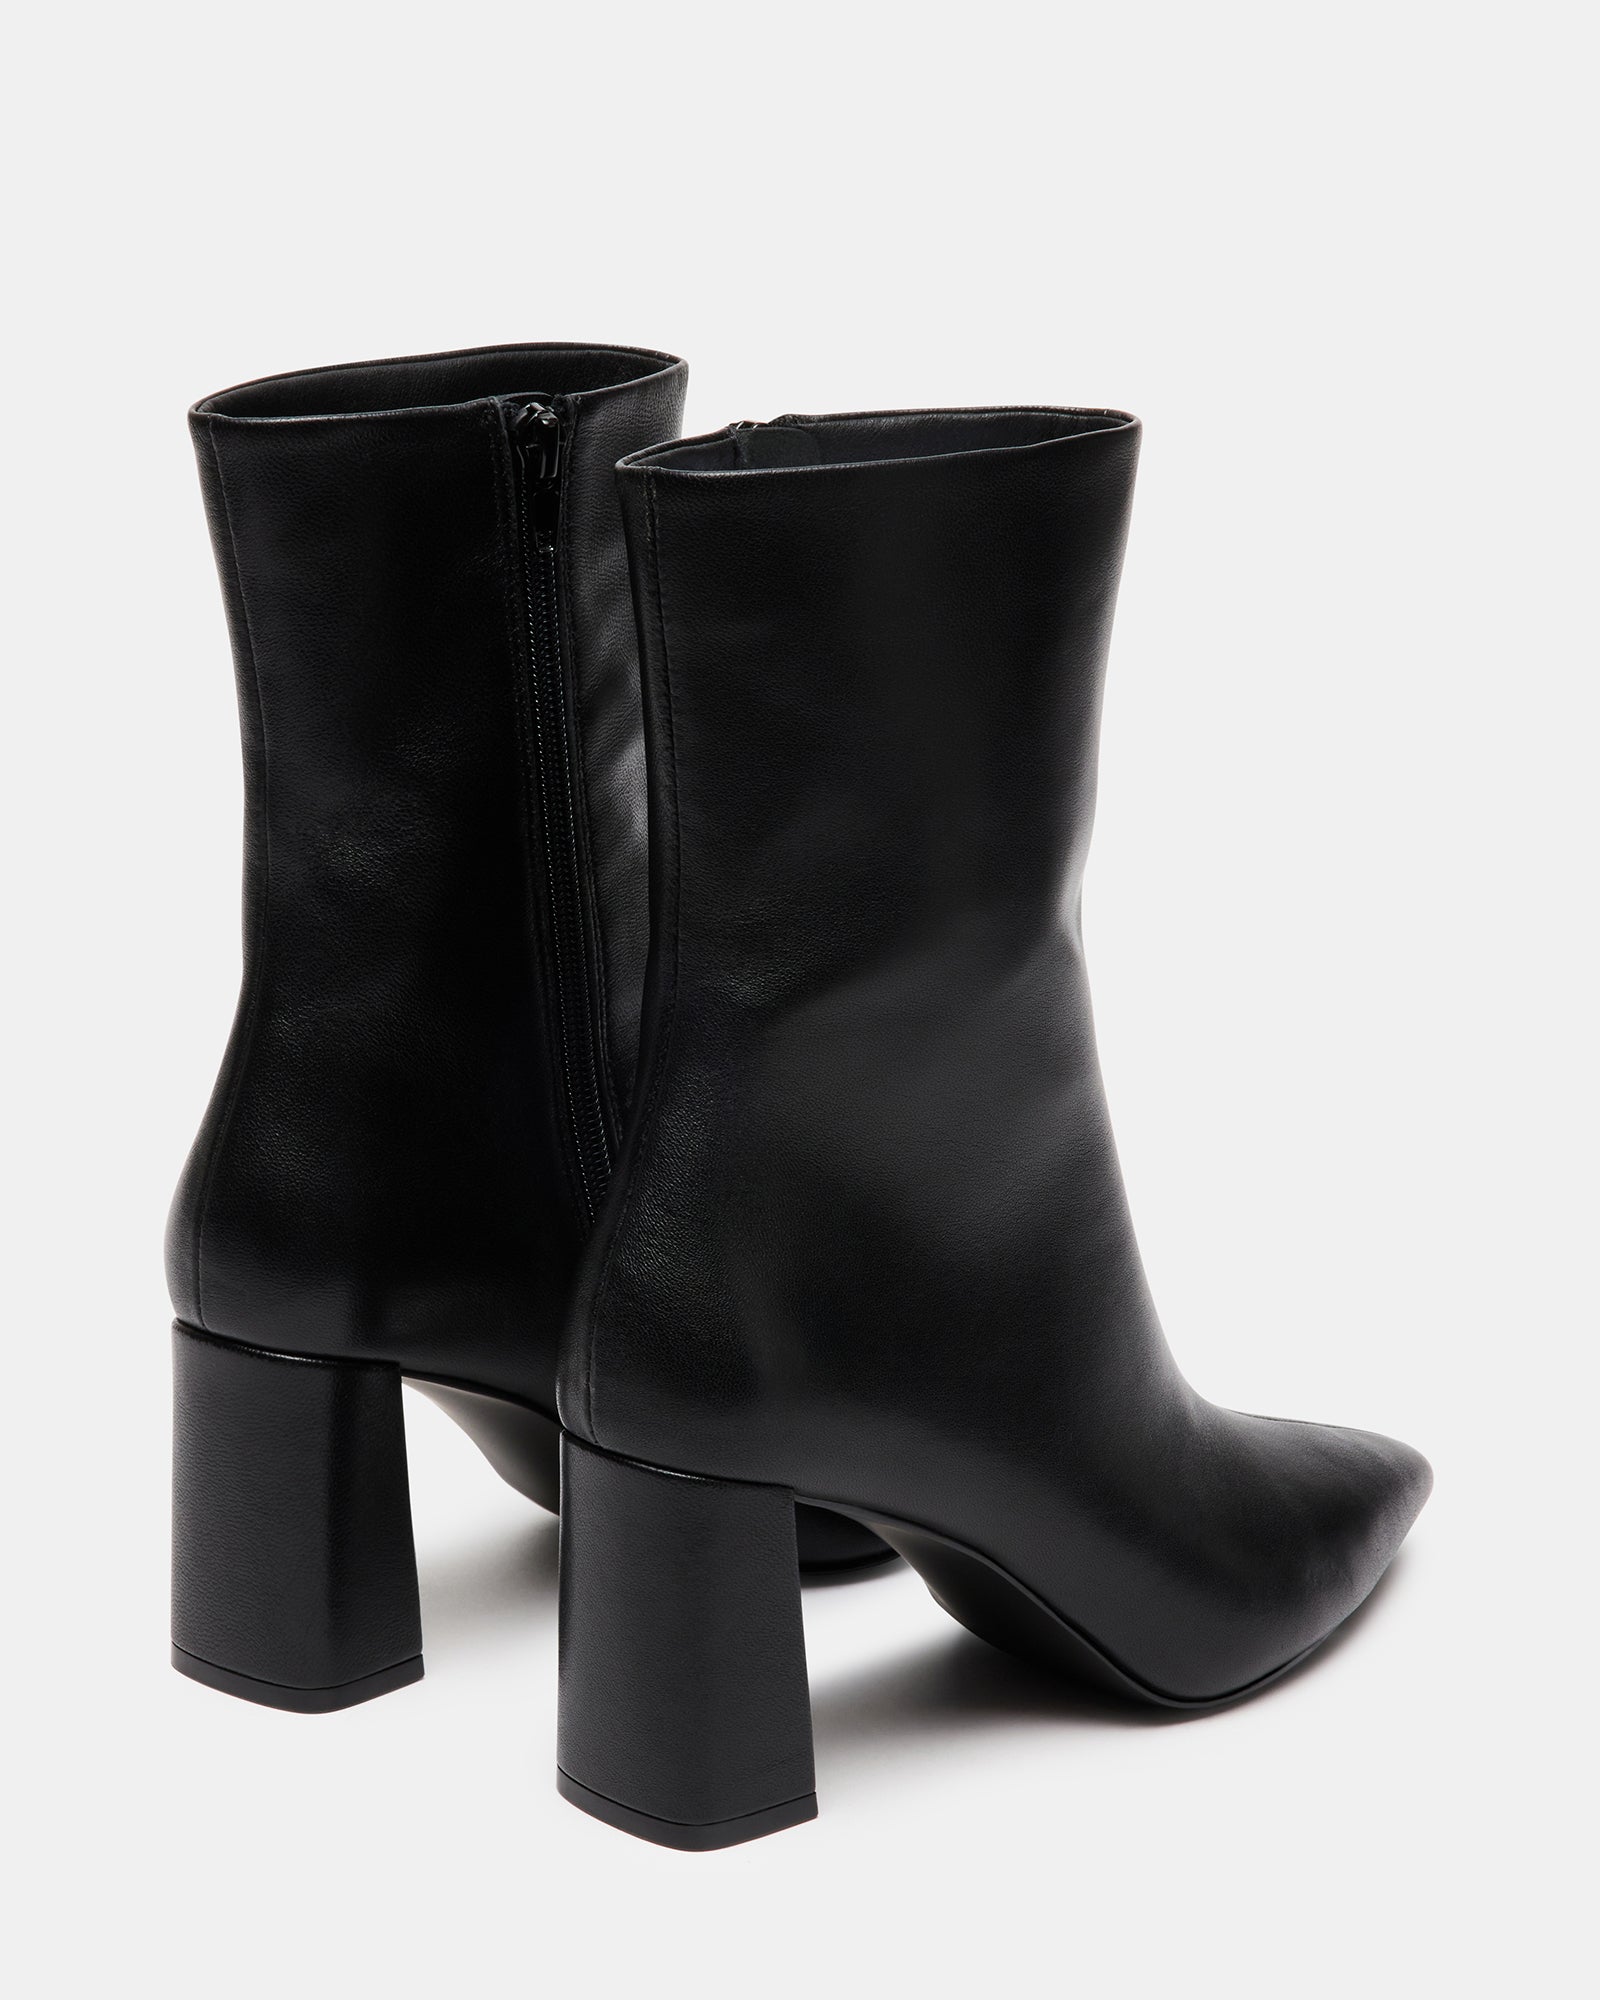 NICOLETTE Black Leather Pointed Toe Ankle Bootie | Women's Booties ...